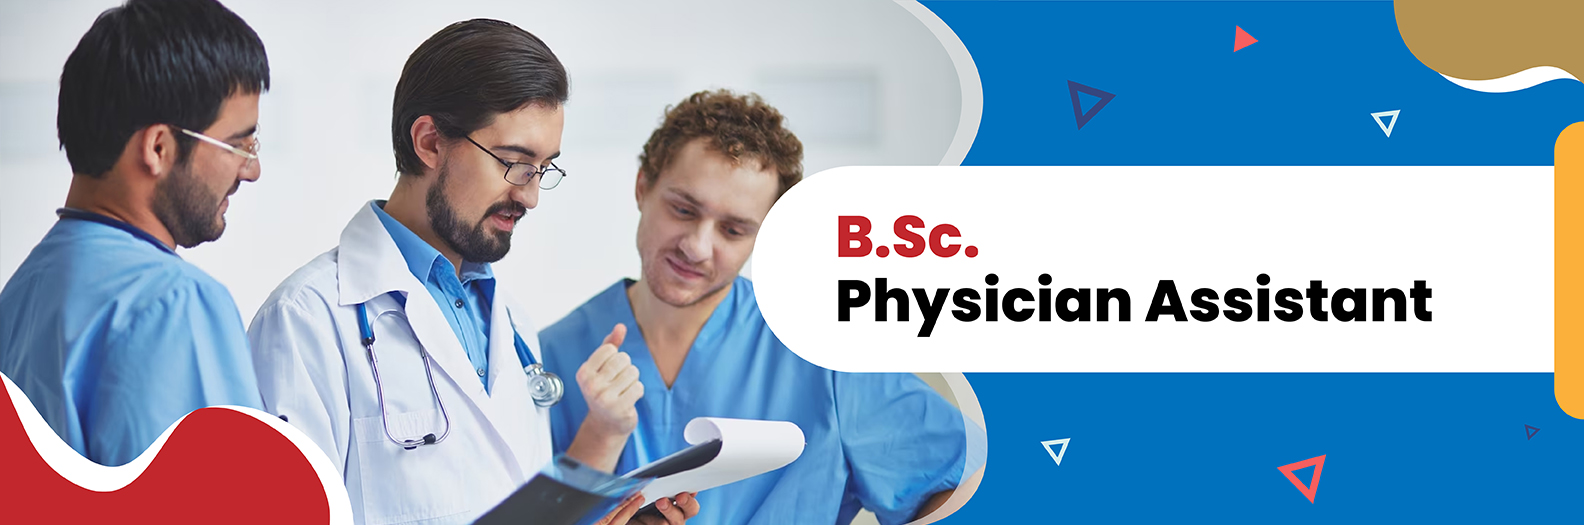 B.Sc. Physician Assistant